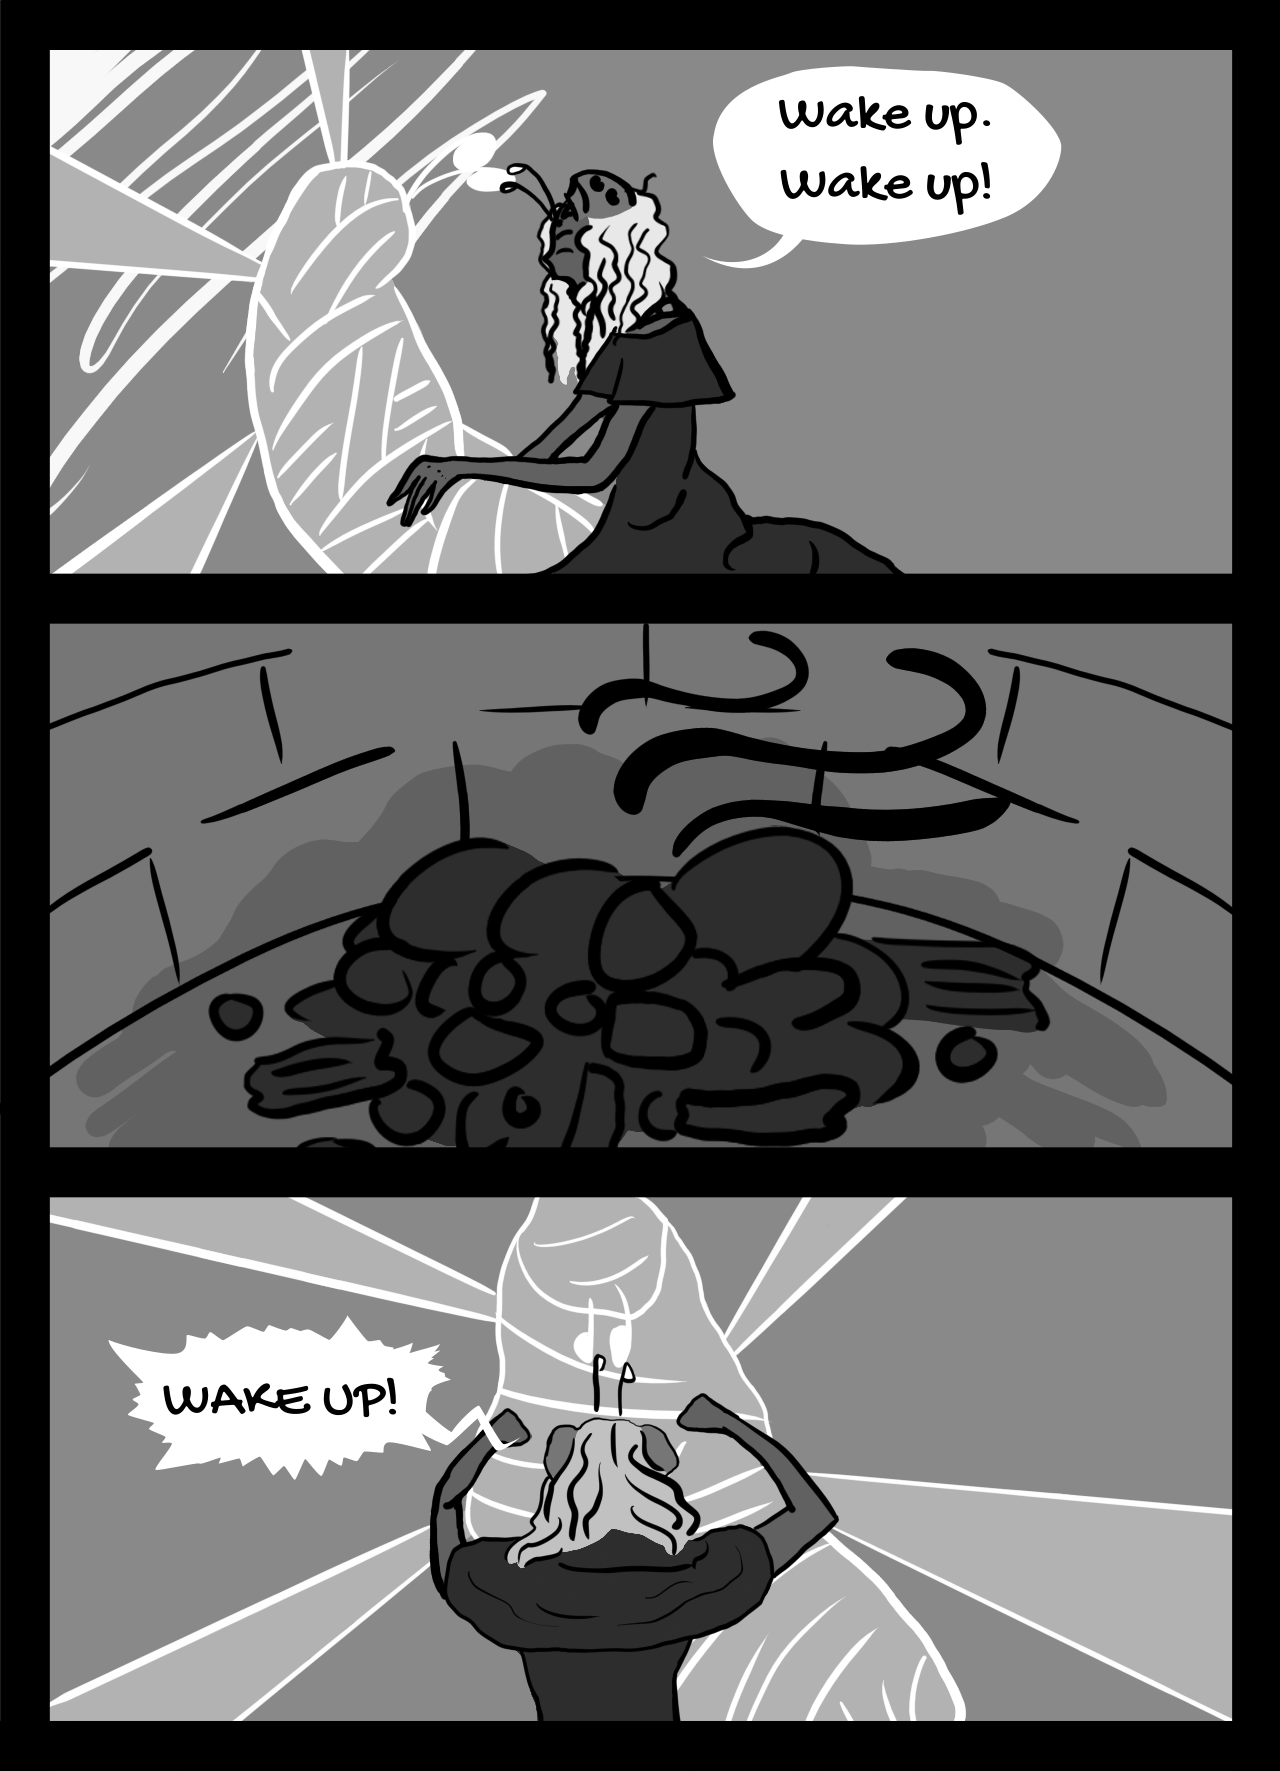 Page 7: An alien girl, named Sallina, shakes a human-sized cocoon, begging for the person inside to wake up.